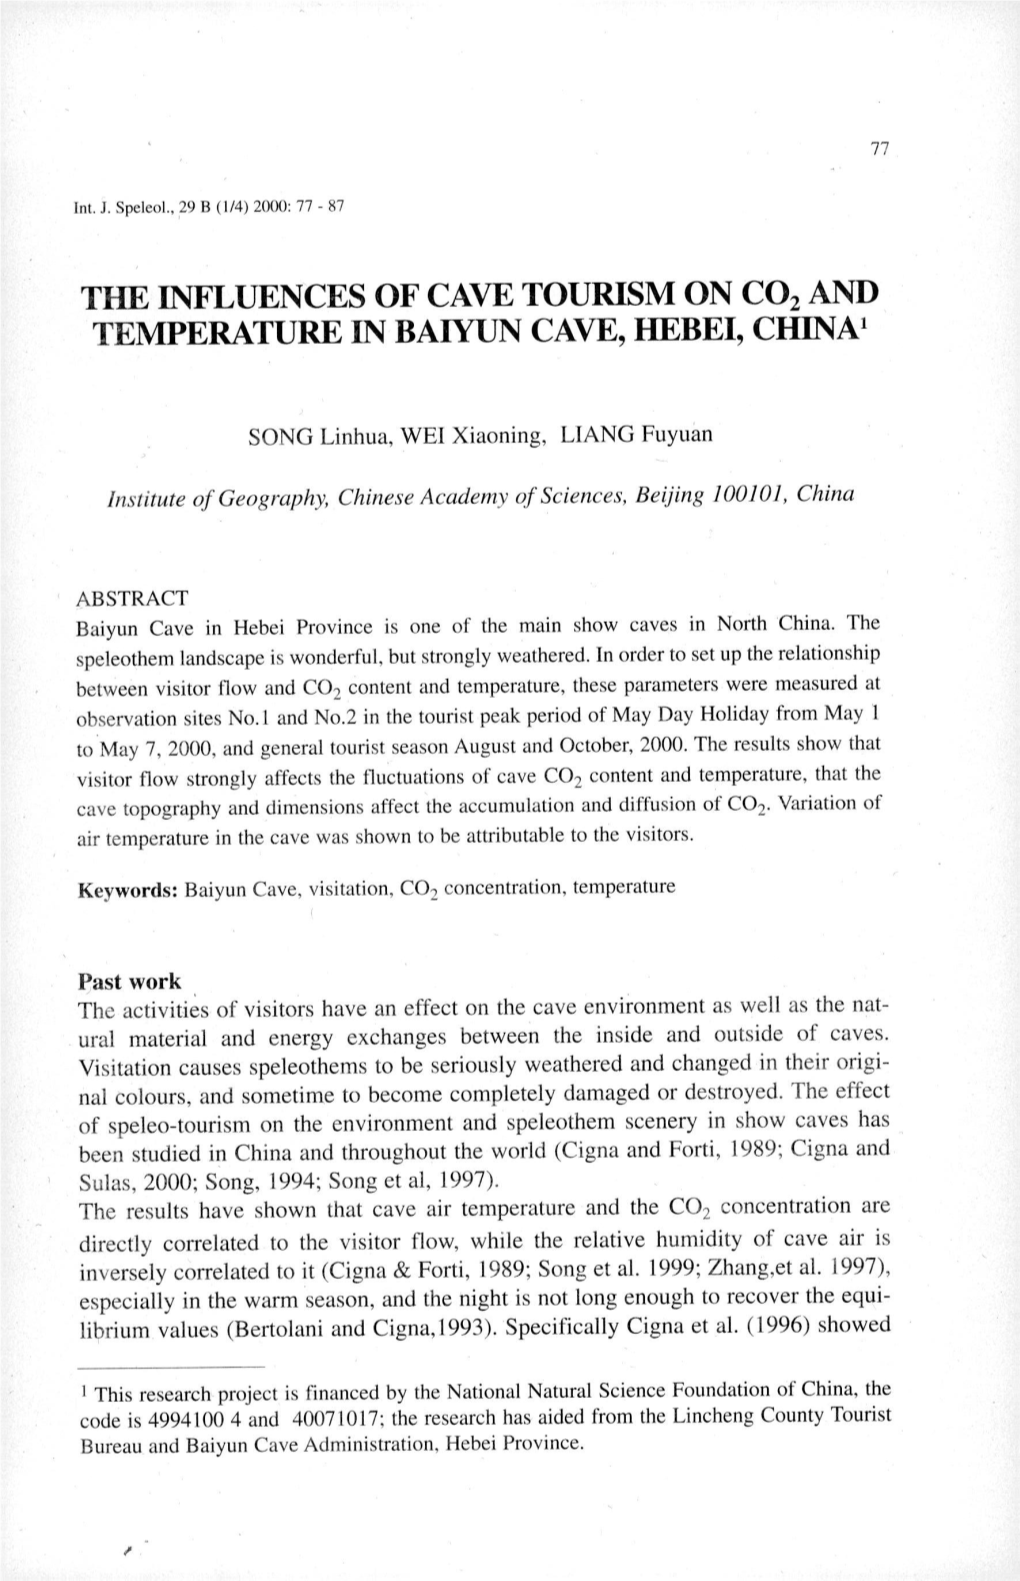 The Influence of Cave Tourism on CO 2 and Temperature in Baiyun Cave